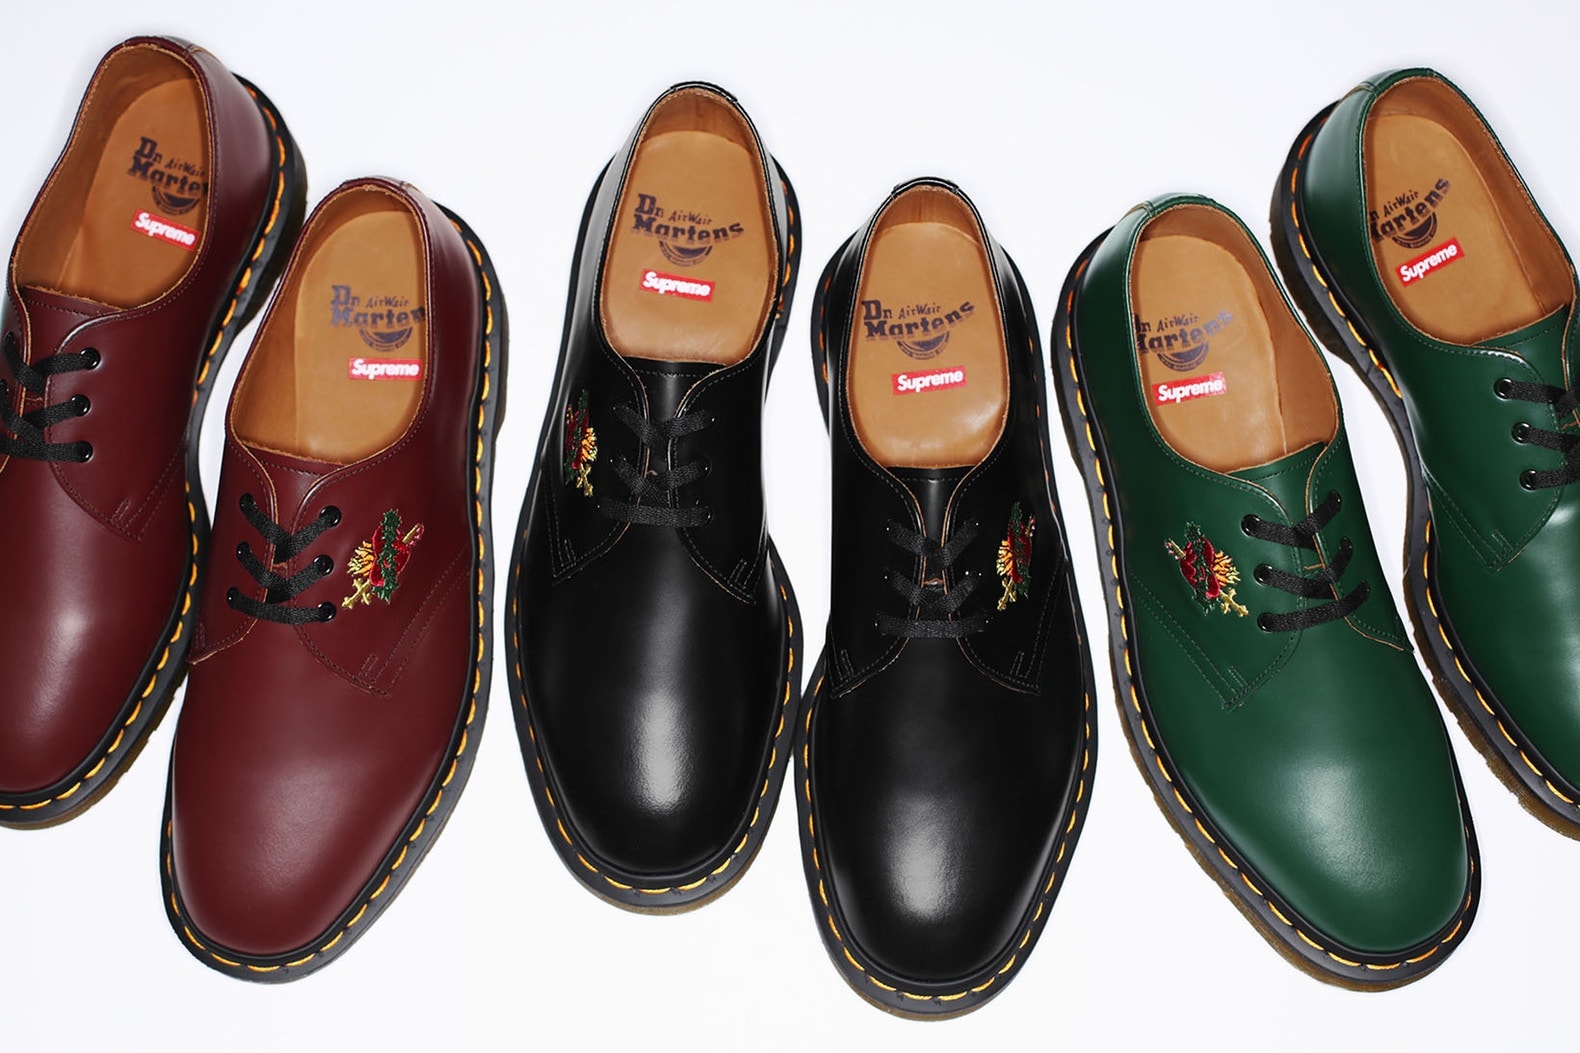 Supreme x Dr. Martens 2017 Fall/Winter Collection